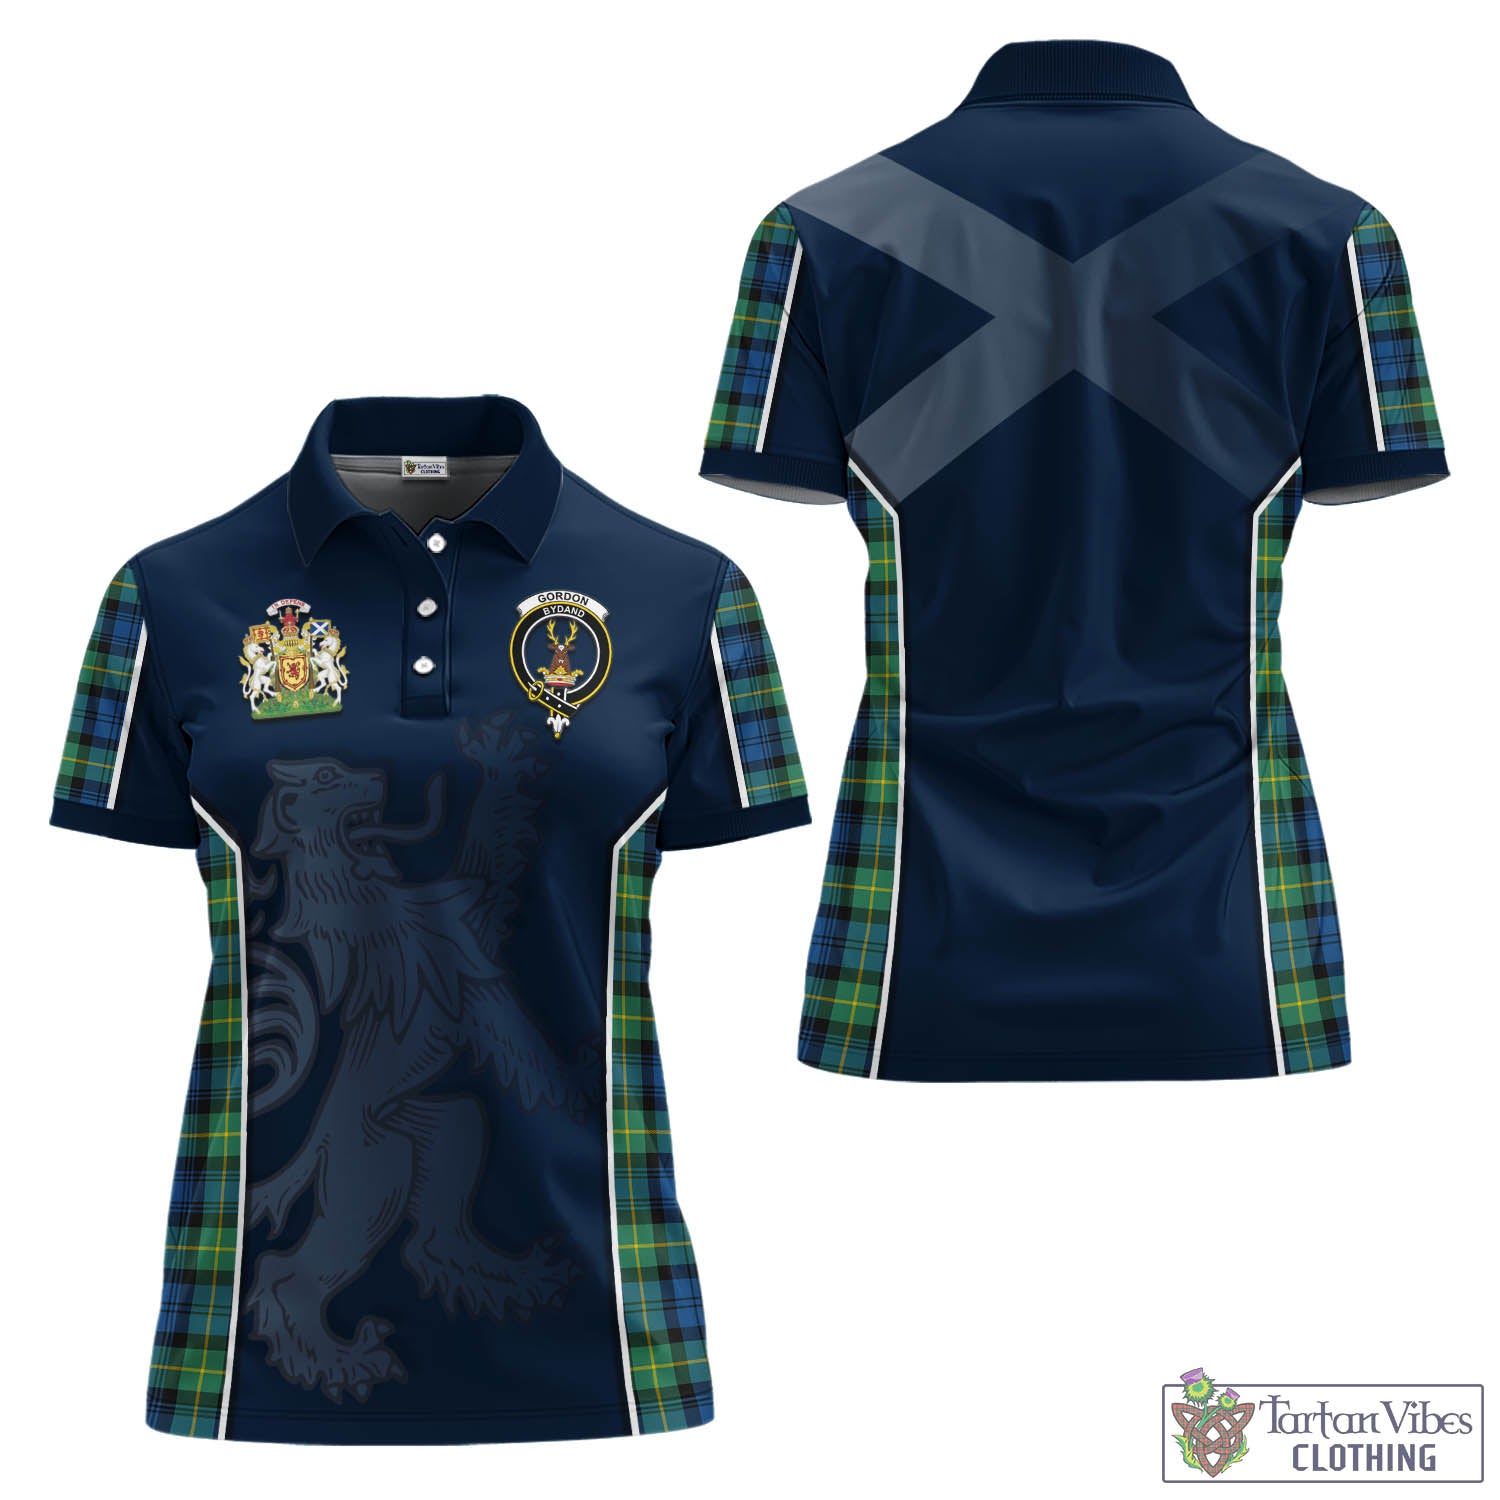 Tartan Vibes Clothing Gordon Ancient Tartan Women's Polo Shirt with Family Crest and Lion Rampant Vibes Sport Style